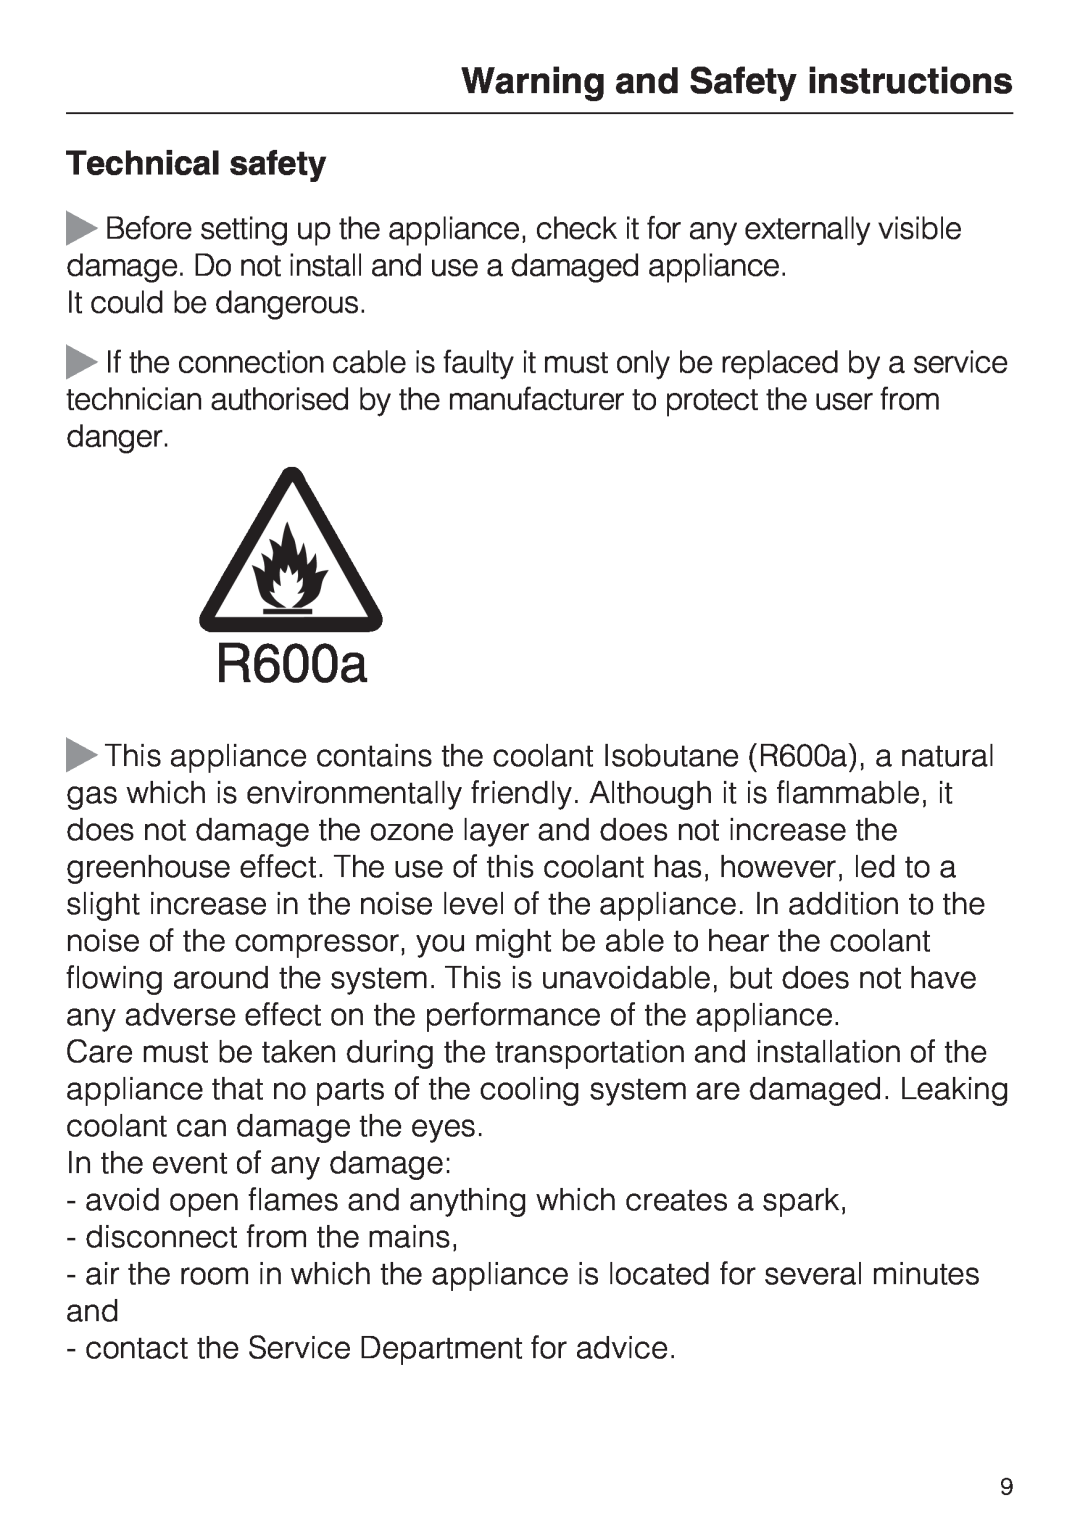 Miele KDN 12623 S-1/-2 installation instructions Technical safety, Warning and Safety instructions 